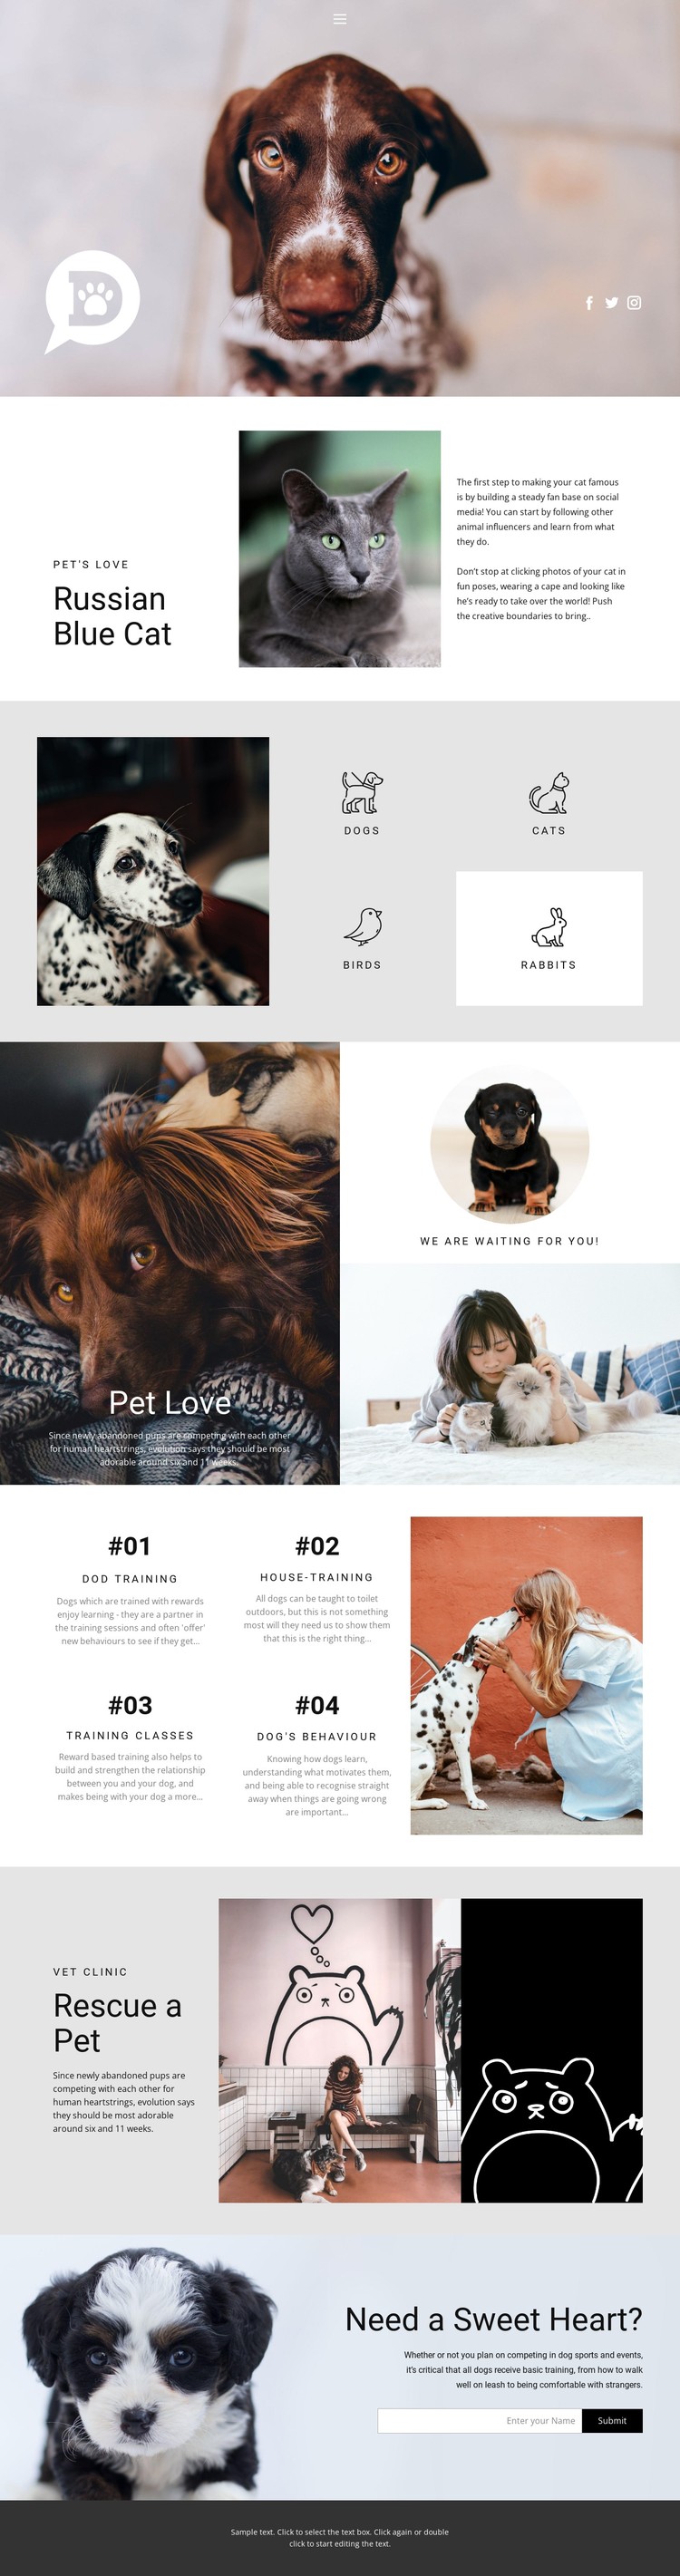 Care for pets and animals CSS Template